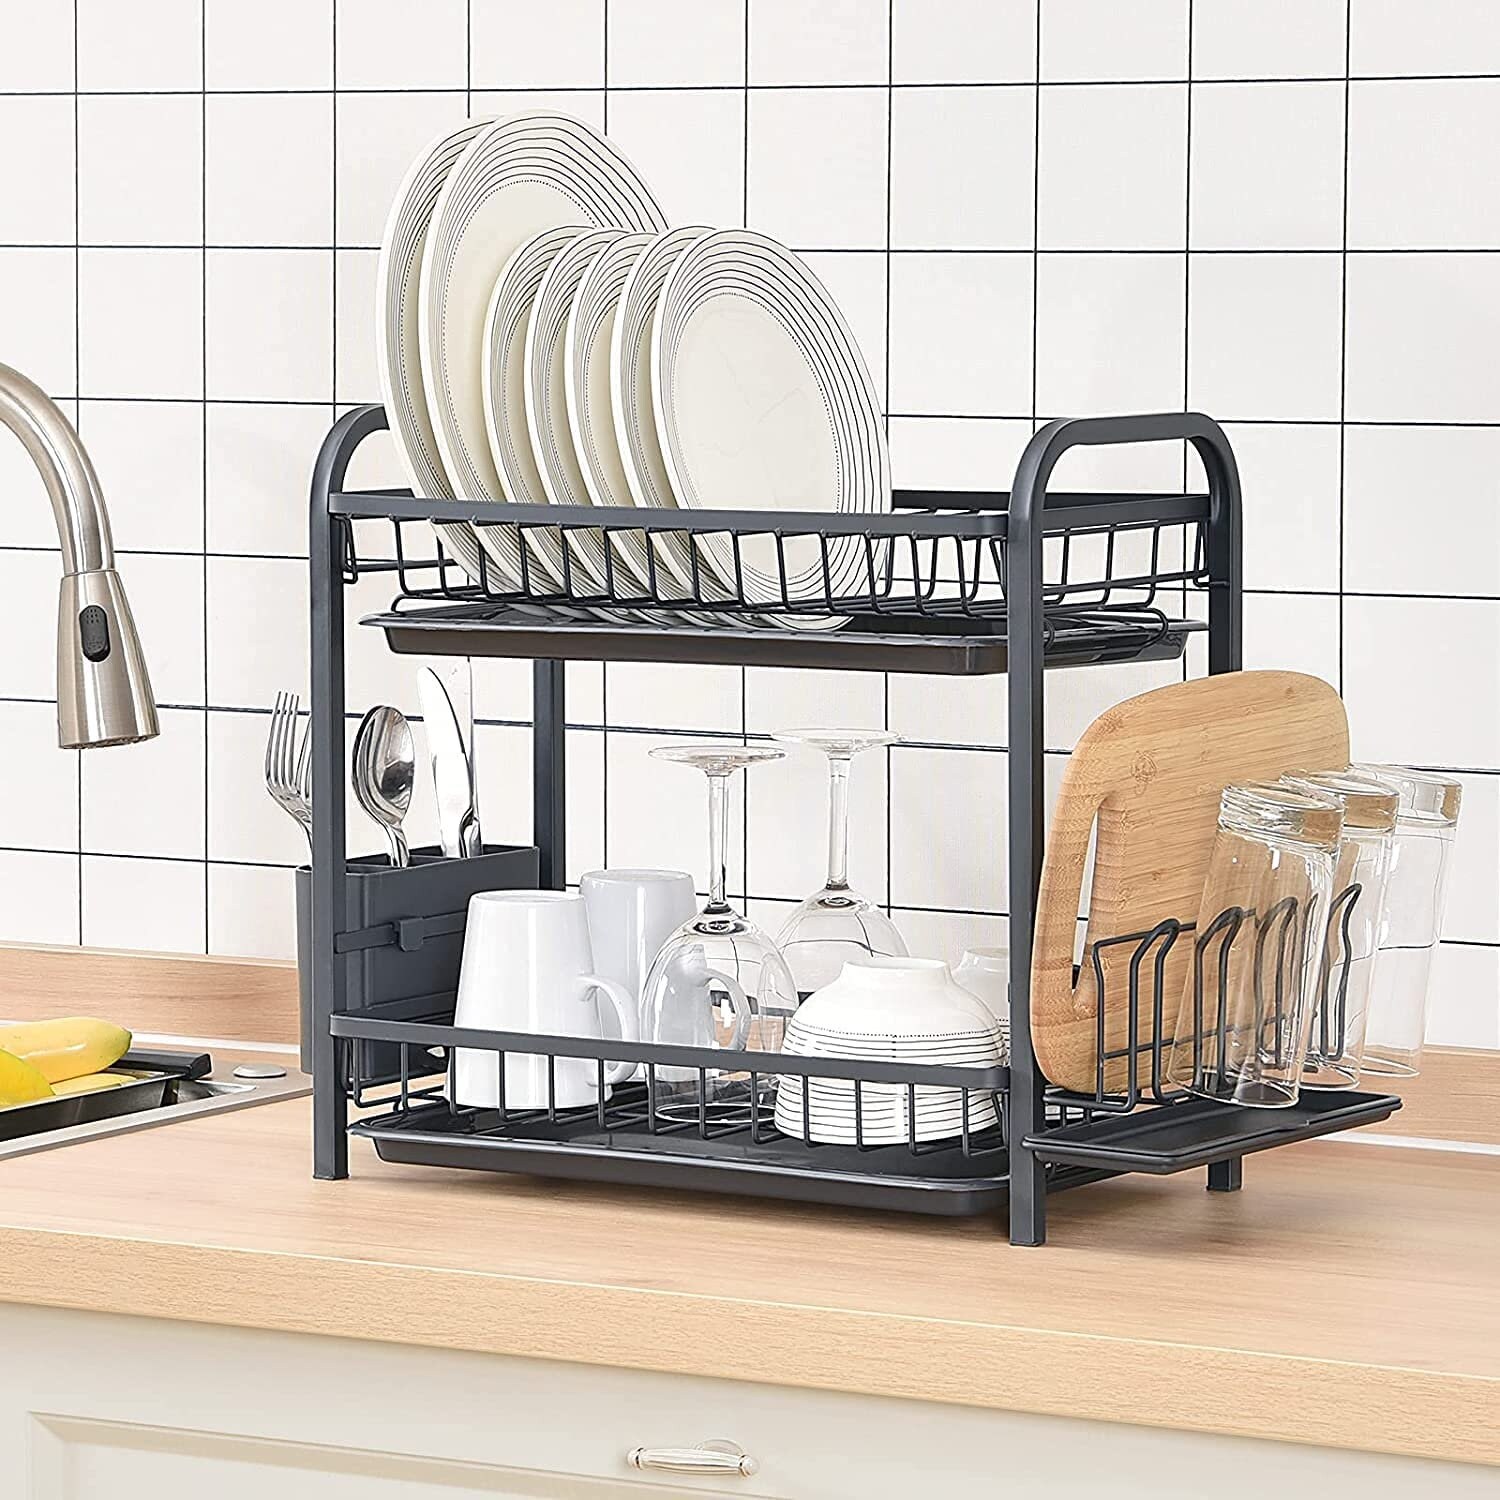 https://ak1.ostkcdn.com/images/products/is/images/direct/81e1cab3083d93d3fdd2c050b1638b6dbaae2866/2-Tier-Dish-Rack-and-Drainboard-Set-with-Utensil-Holder.jpg